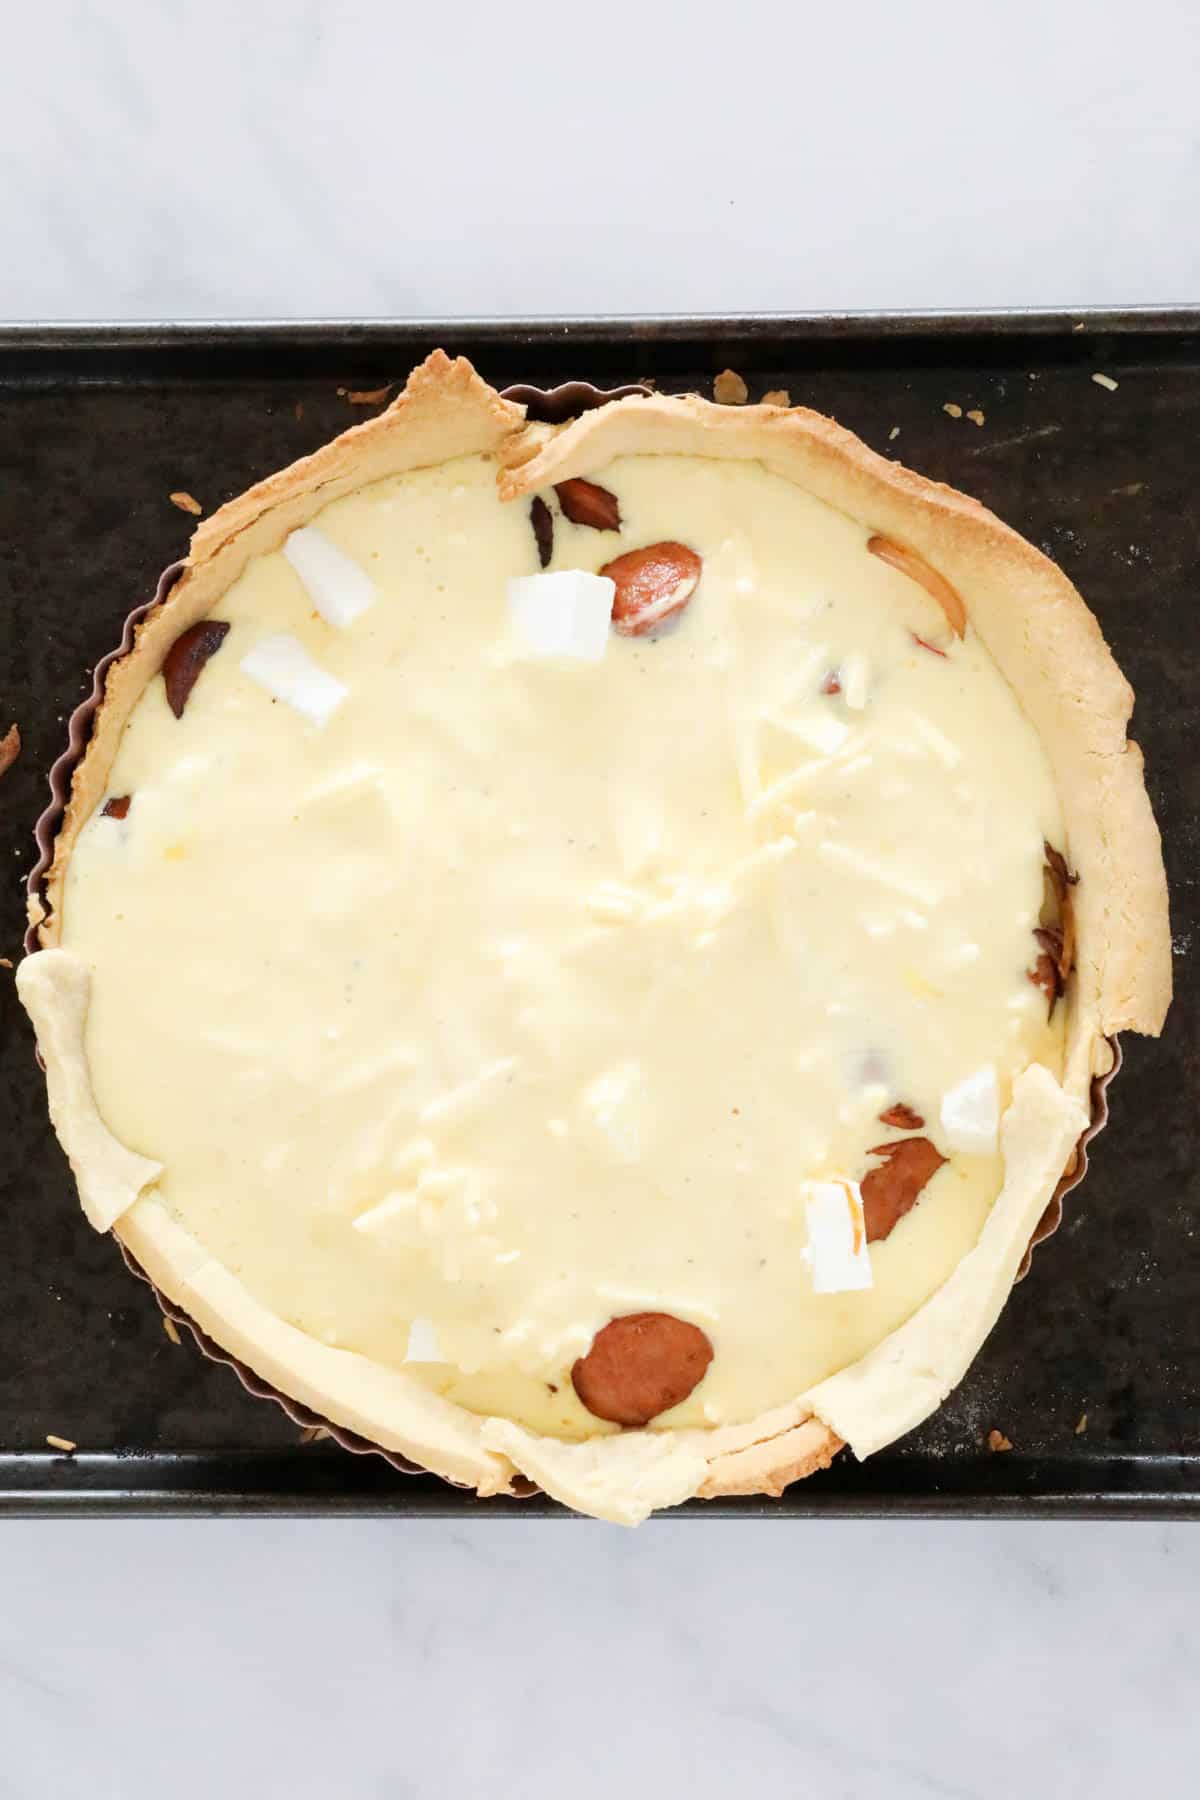 The cream and egg mixture poured over the fillings in the pasty case.